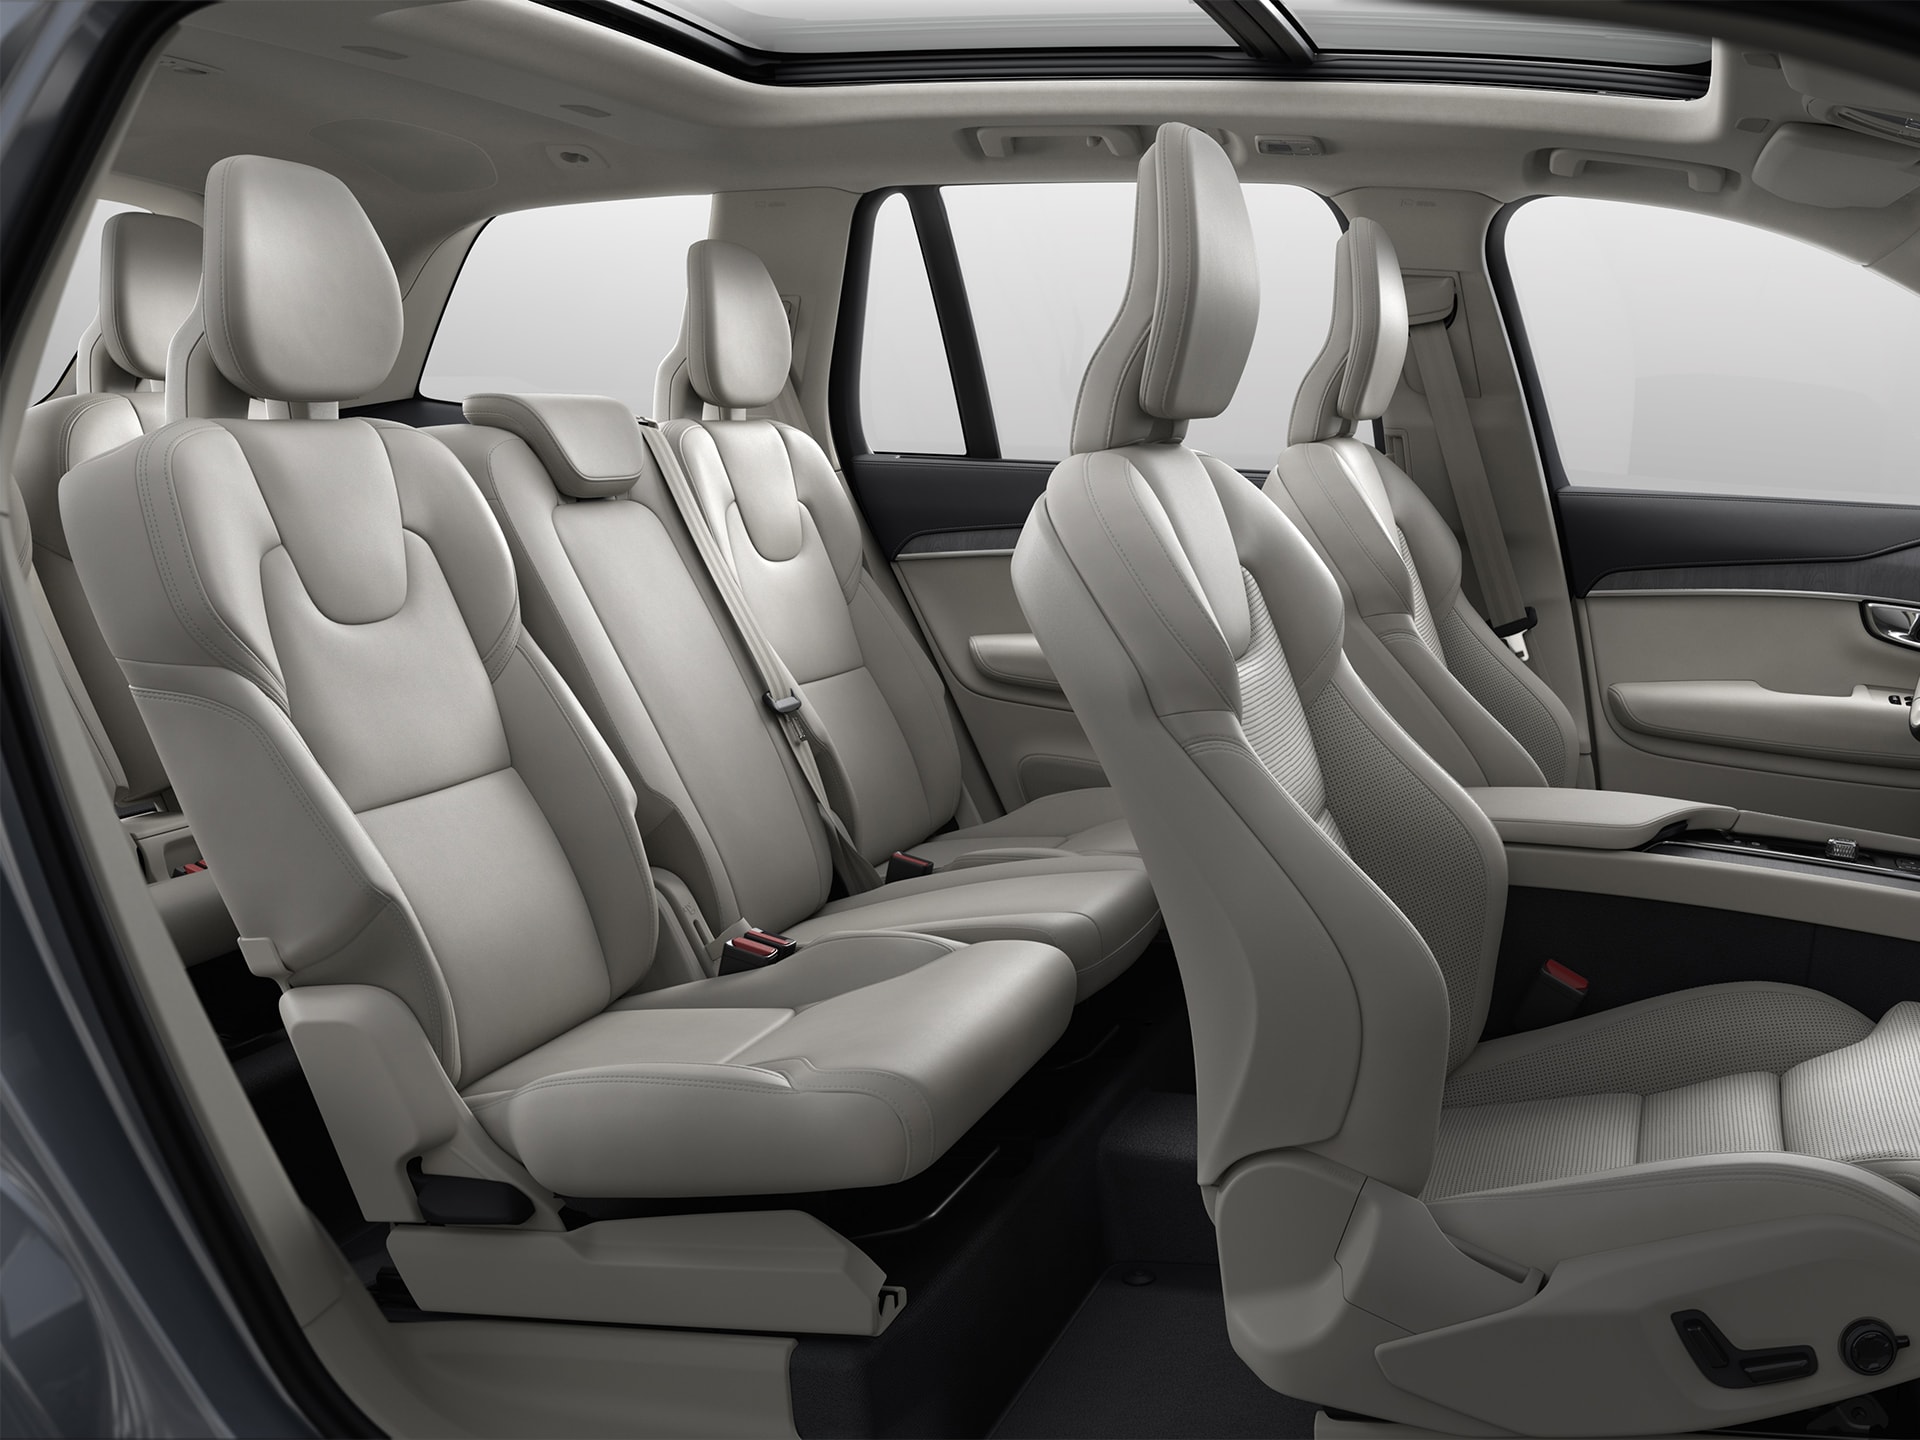 Roomy and comfortable cabin interior of Volvo XC90 SUV.